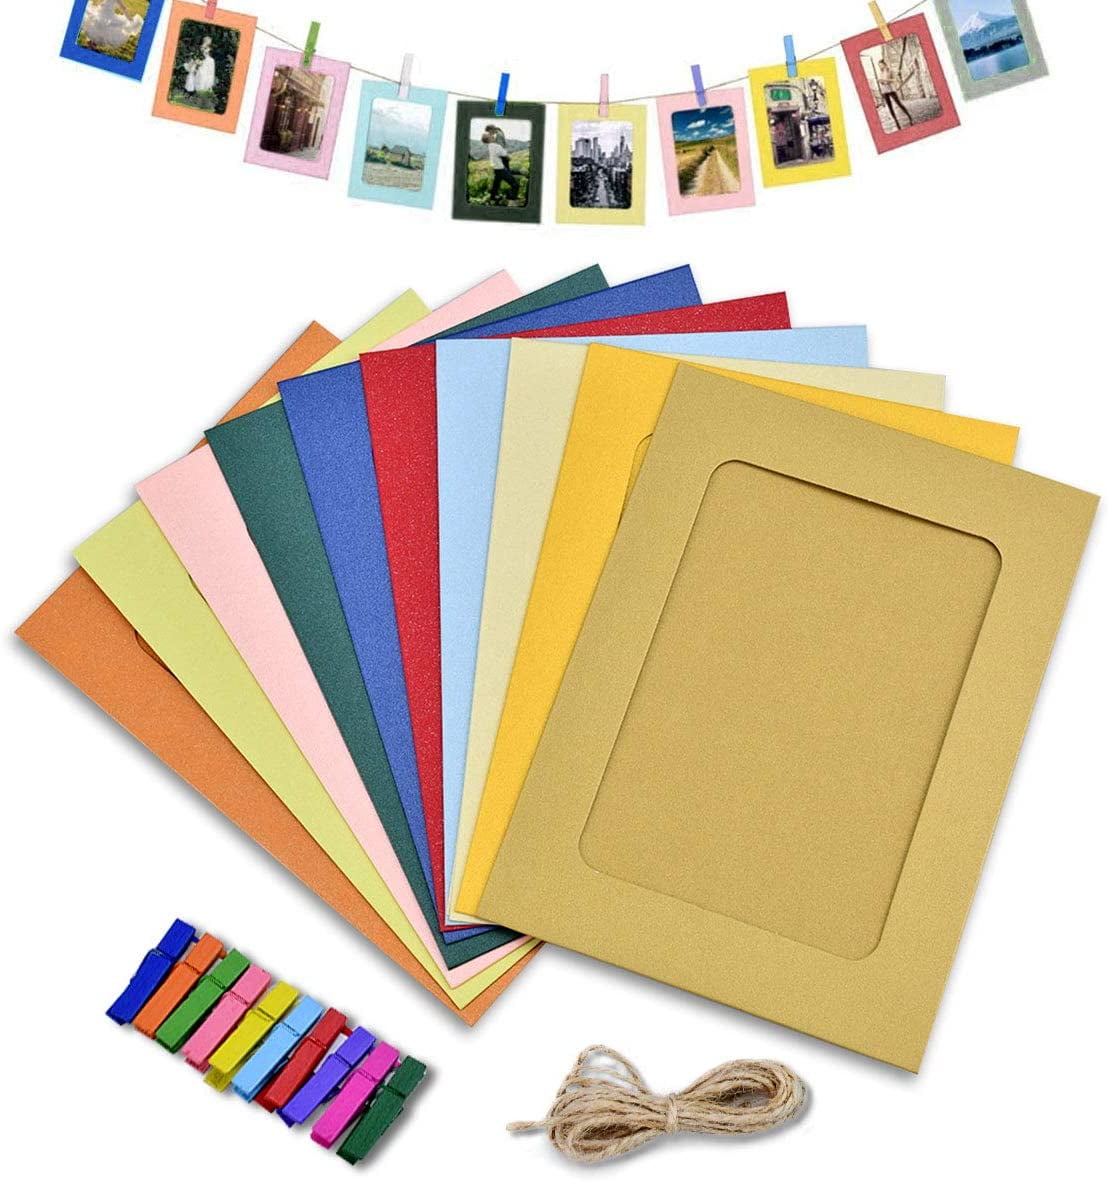 Generic Paper Photo Frame 4x6 Kraft Paper Picture Frames 30 Pcs DIY Cardboard Photo Frames with Wood Clips and Jute Twine (4x6 inch 30